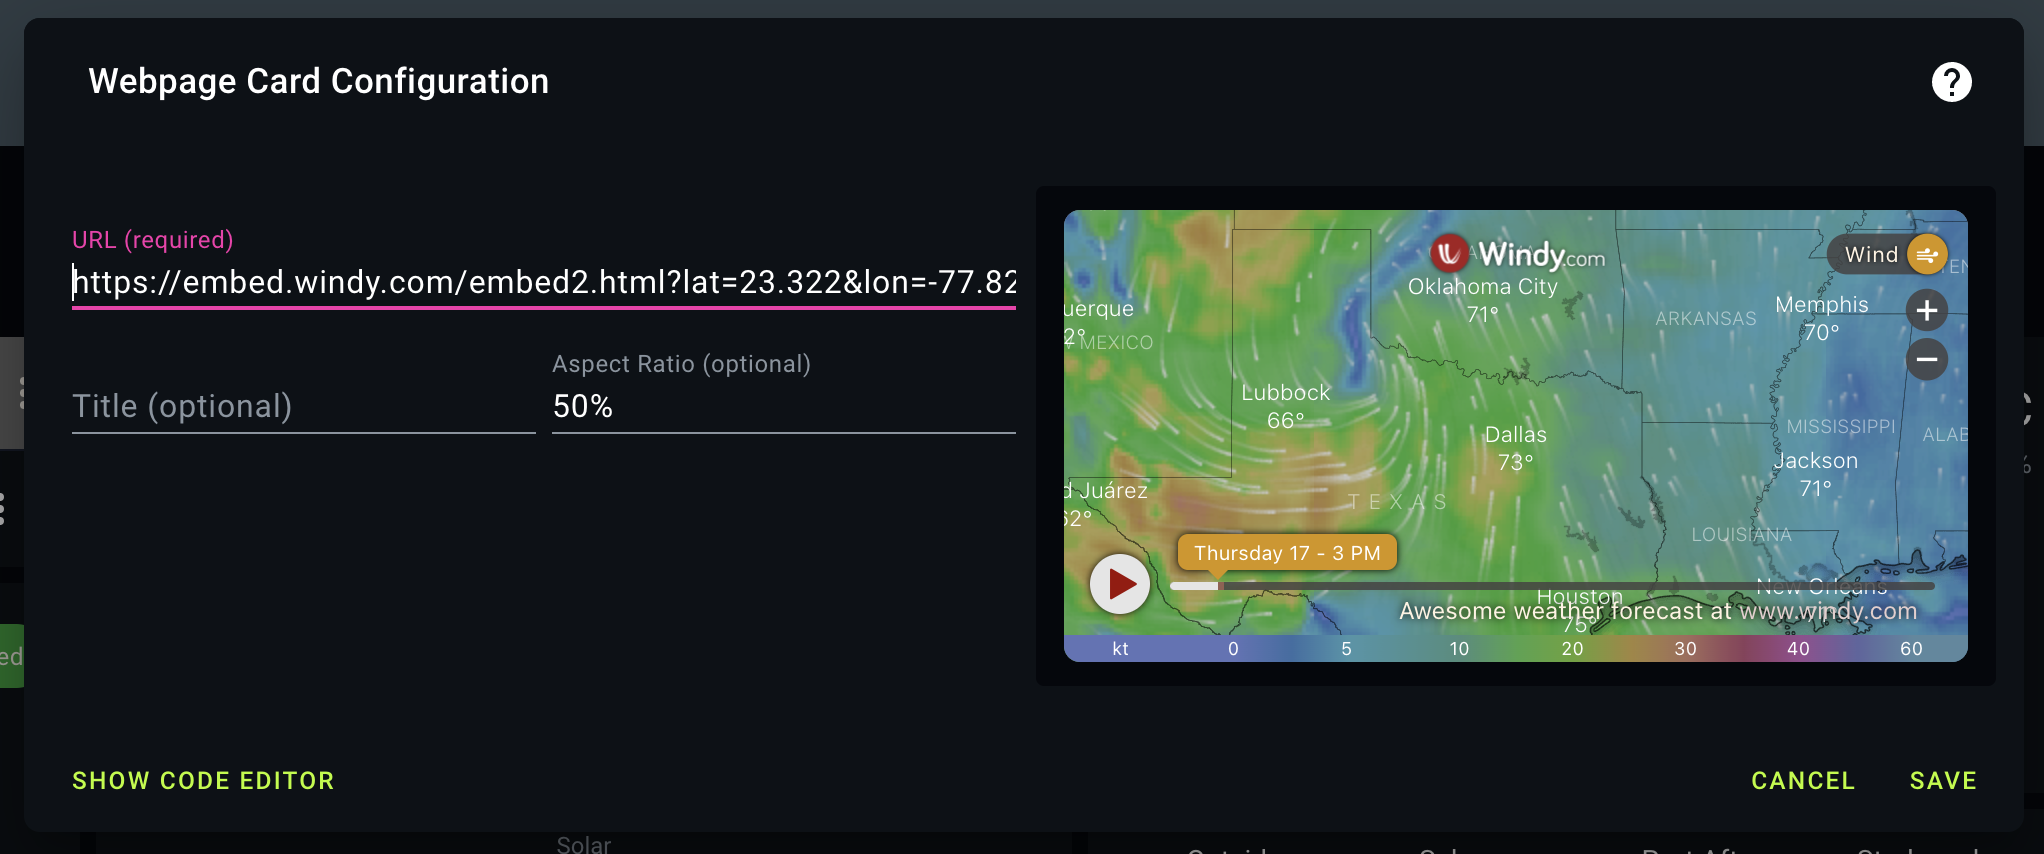 Generating GPS-powered wind forecasts with Windy.com